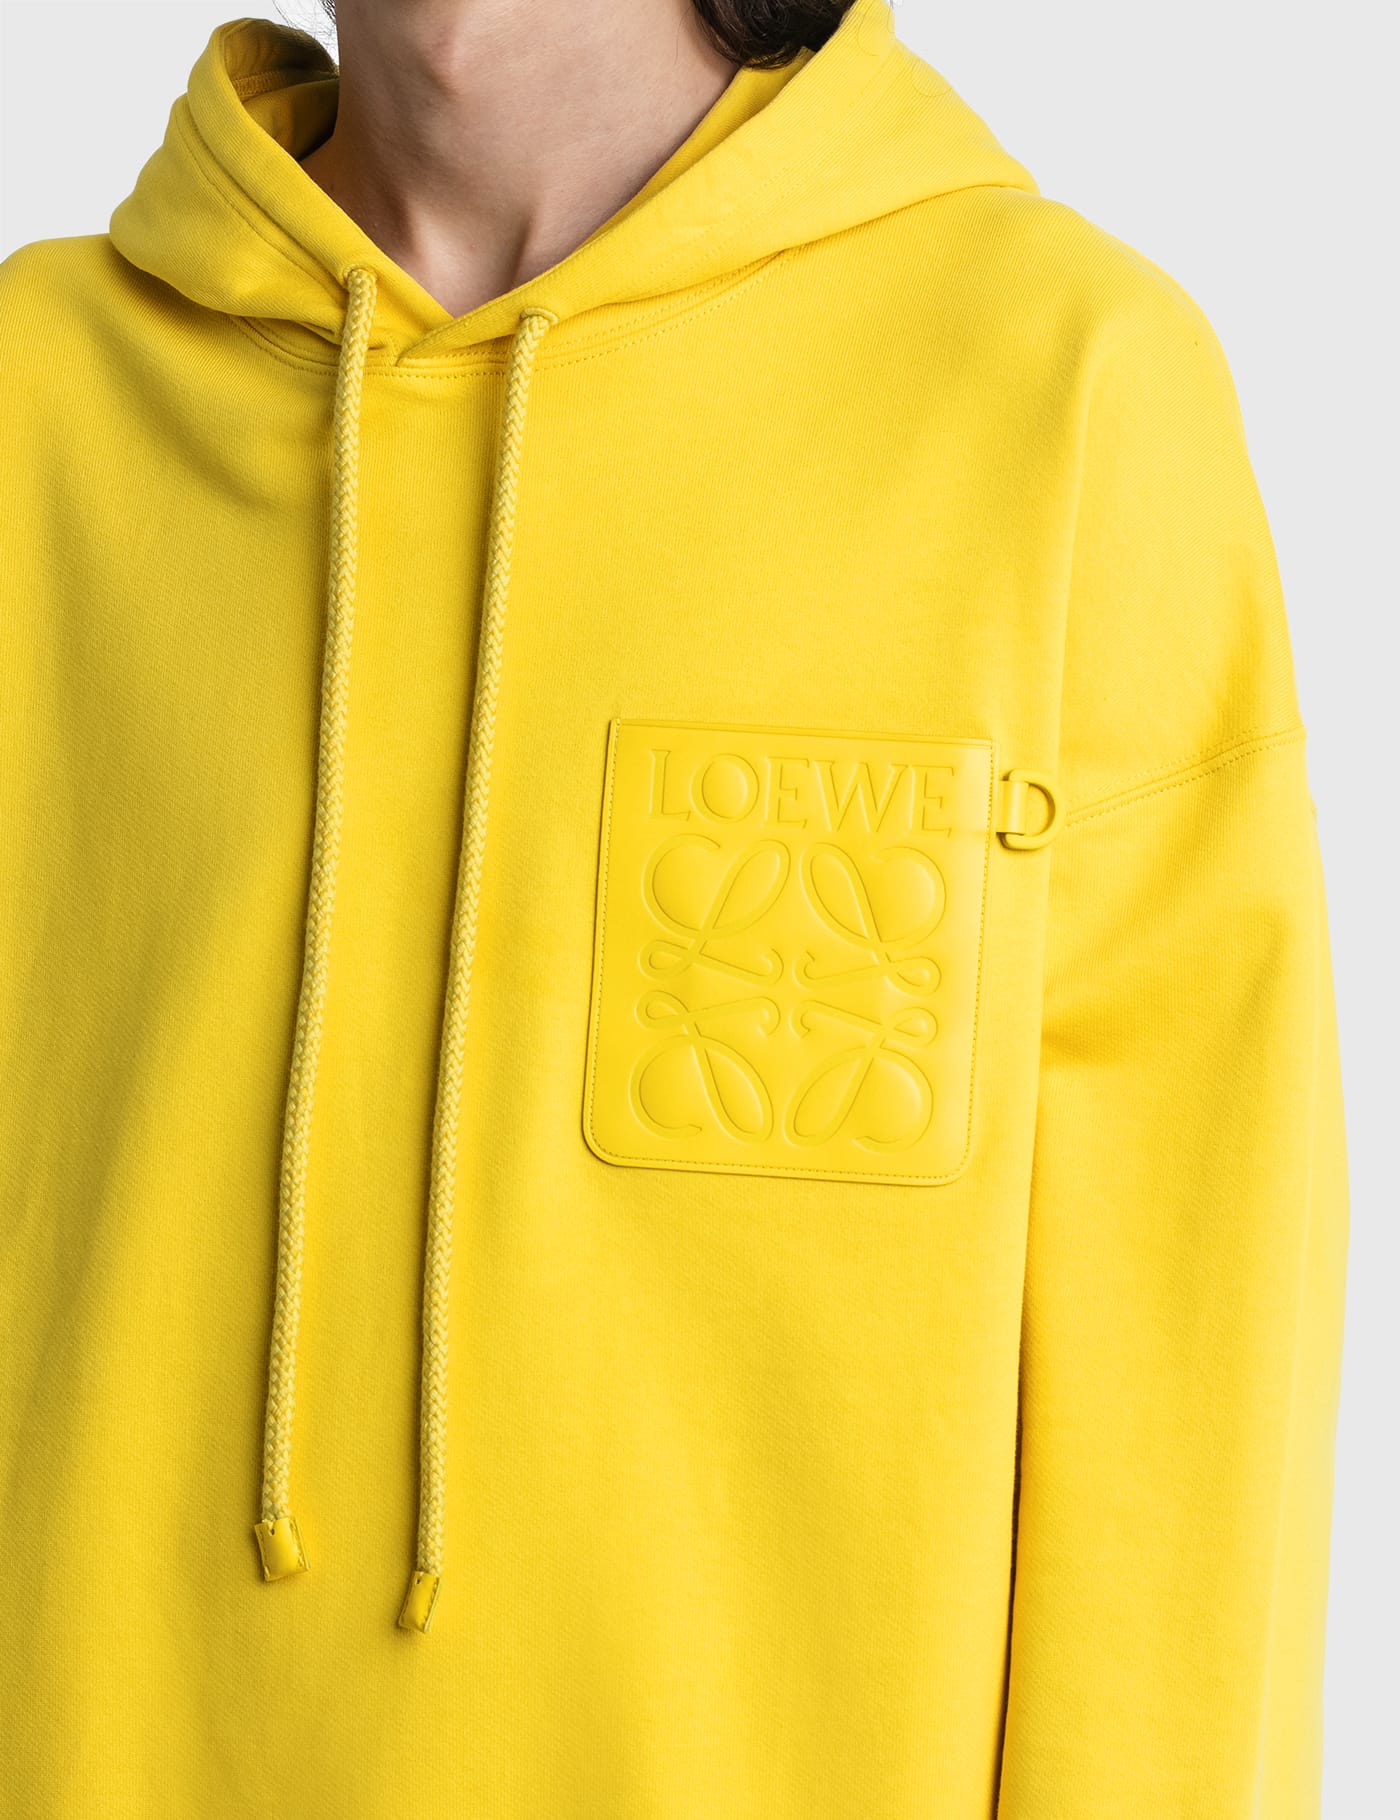 Loewe - Anagram Patch Hoodie | HBX - Globally Curated Fashion and Lifestyle  by Hypebeast